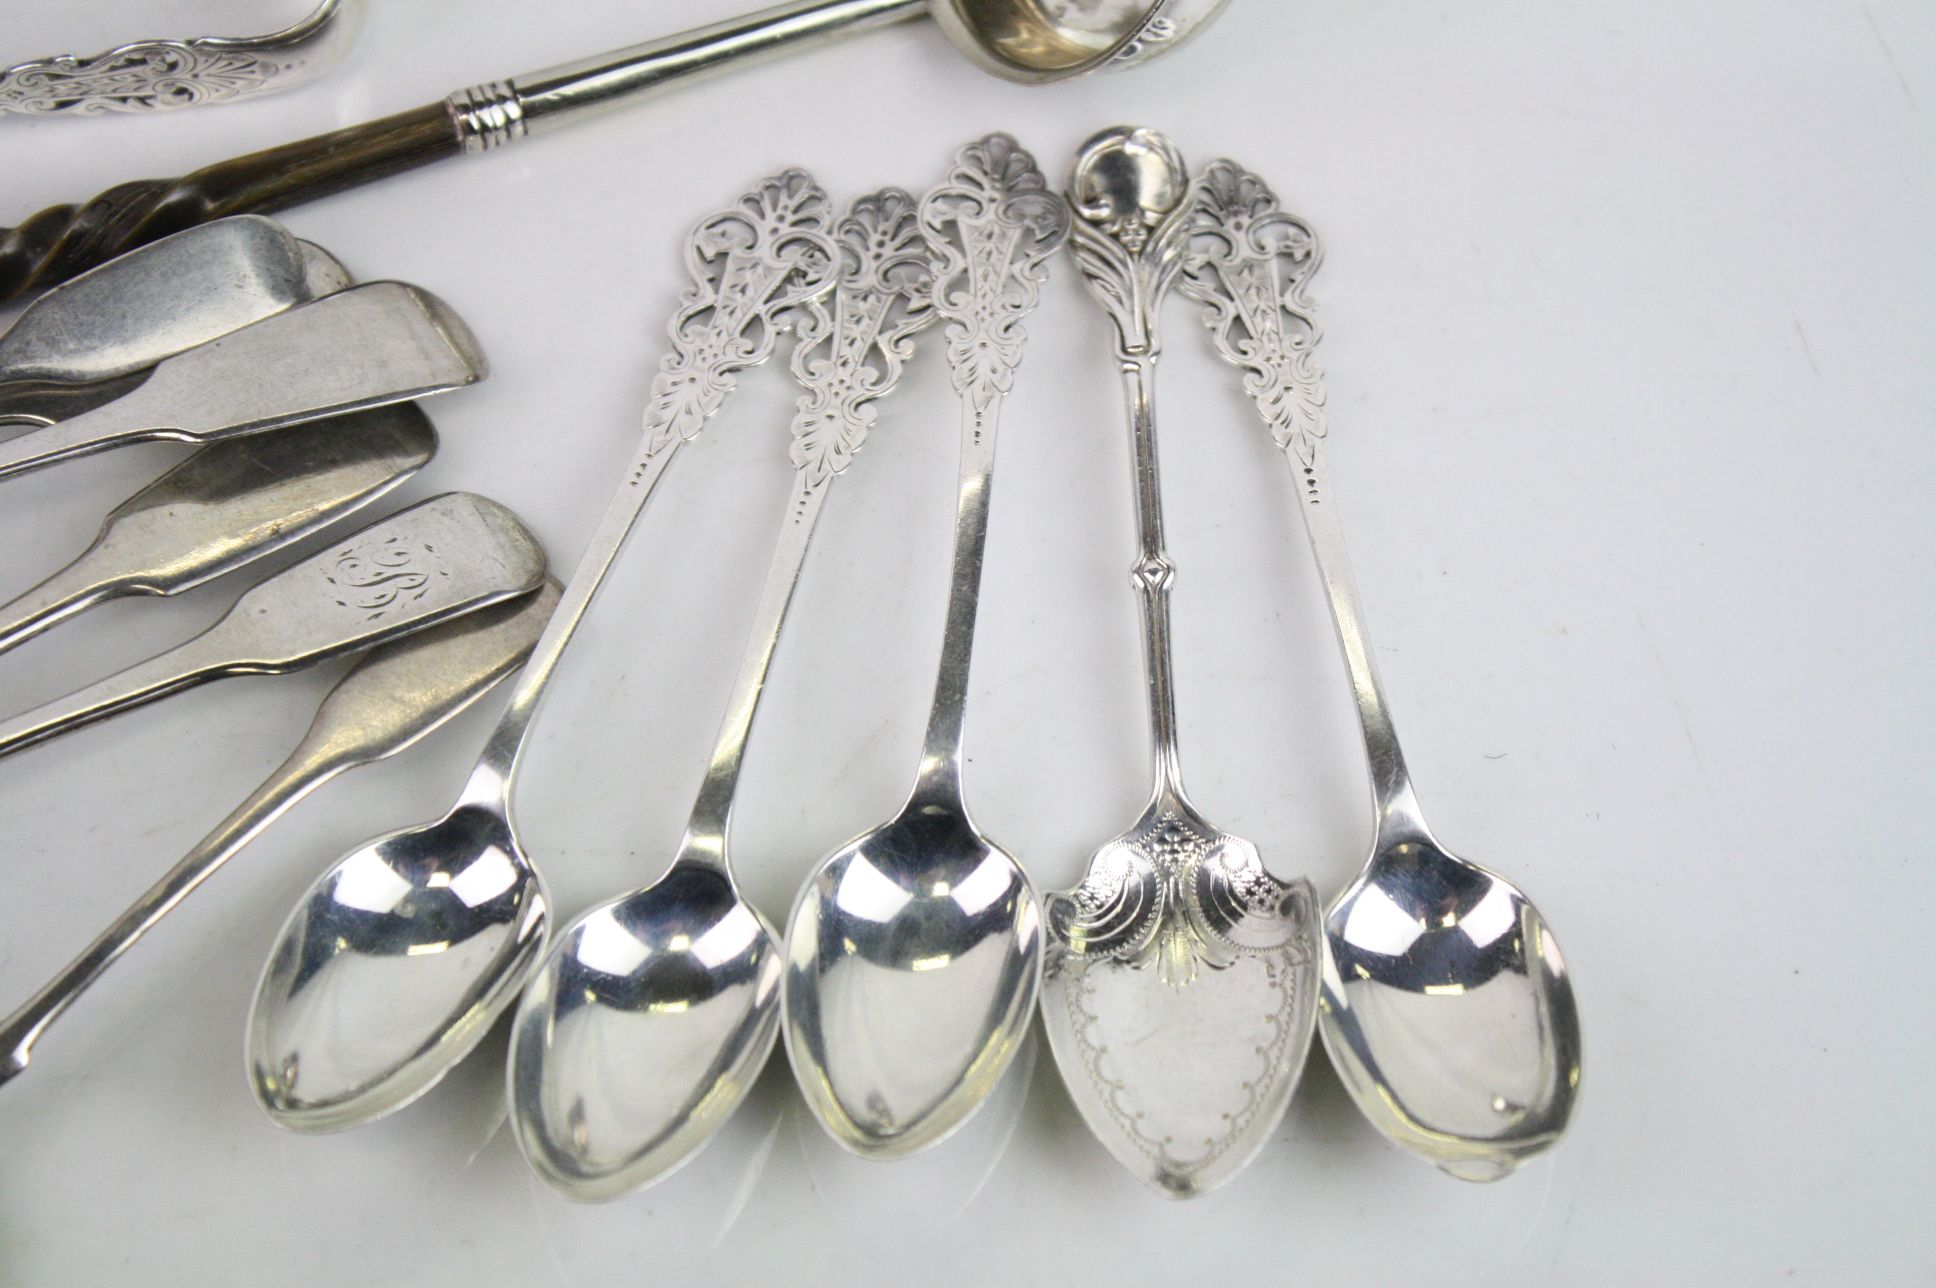 Three early Victorian silver gilt salt spoons, fiddle pattern, makers Thomas Byrne, Exeter 1844; - Image 2 of 4